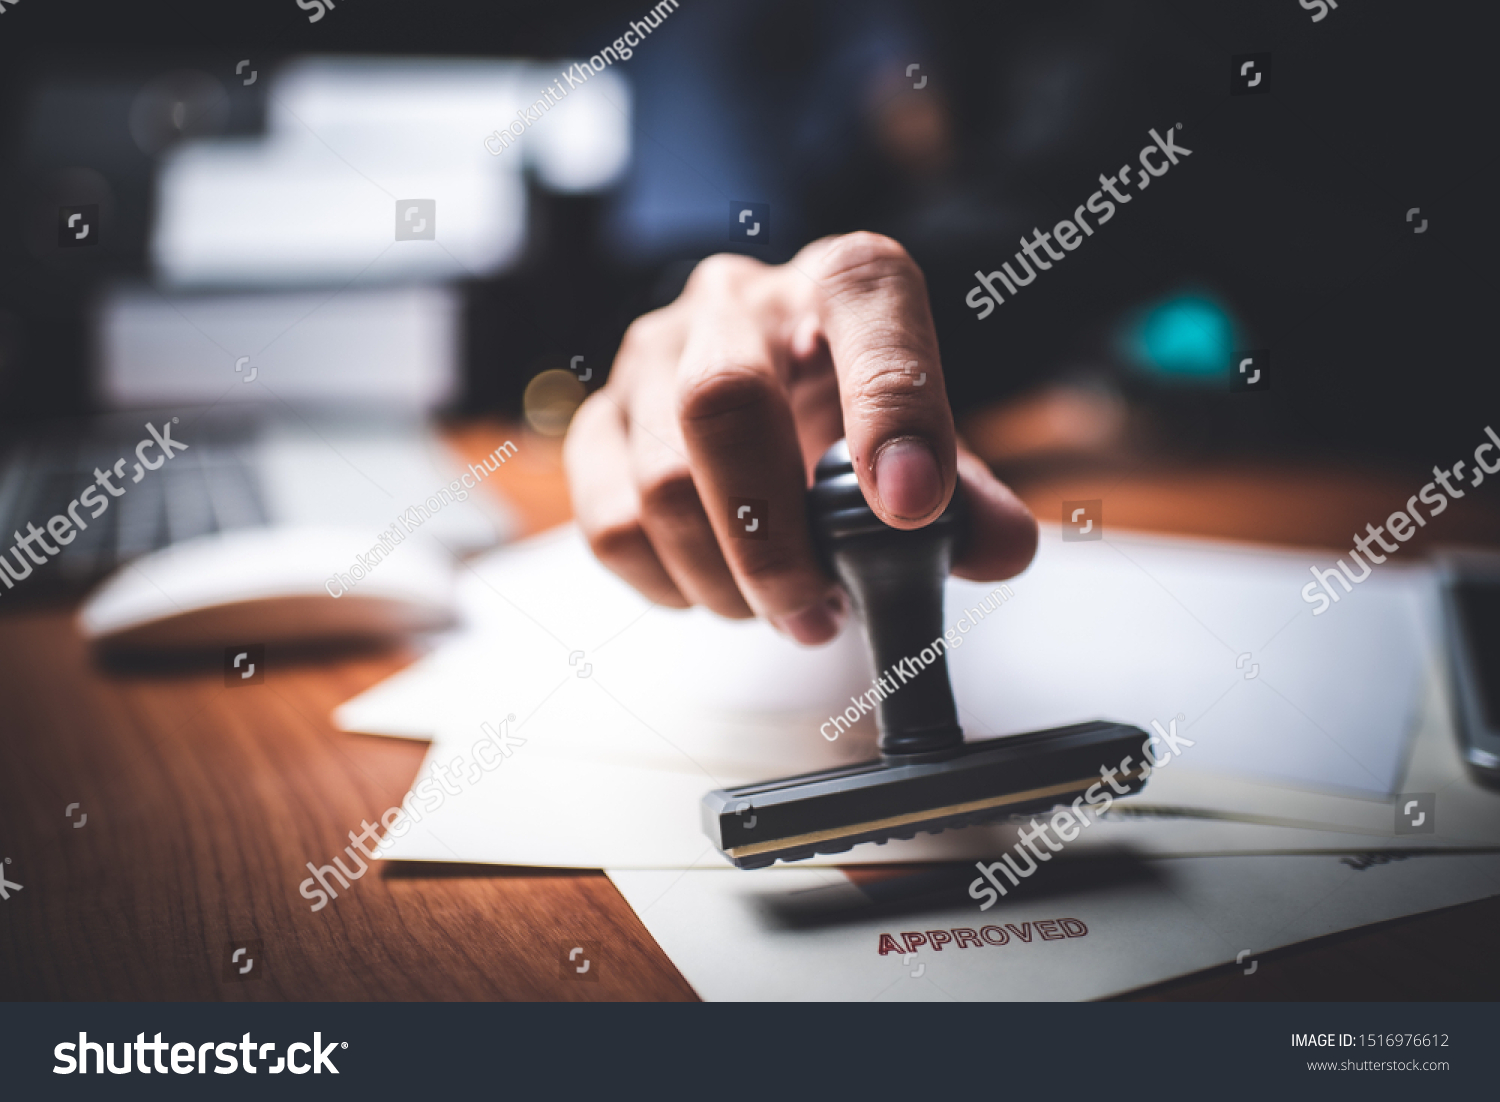 Close-up Of A Person's Hand Stamping With Approved Stamp On Text Approved Document At Desk,  Contract Form Paper #1516976612